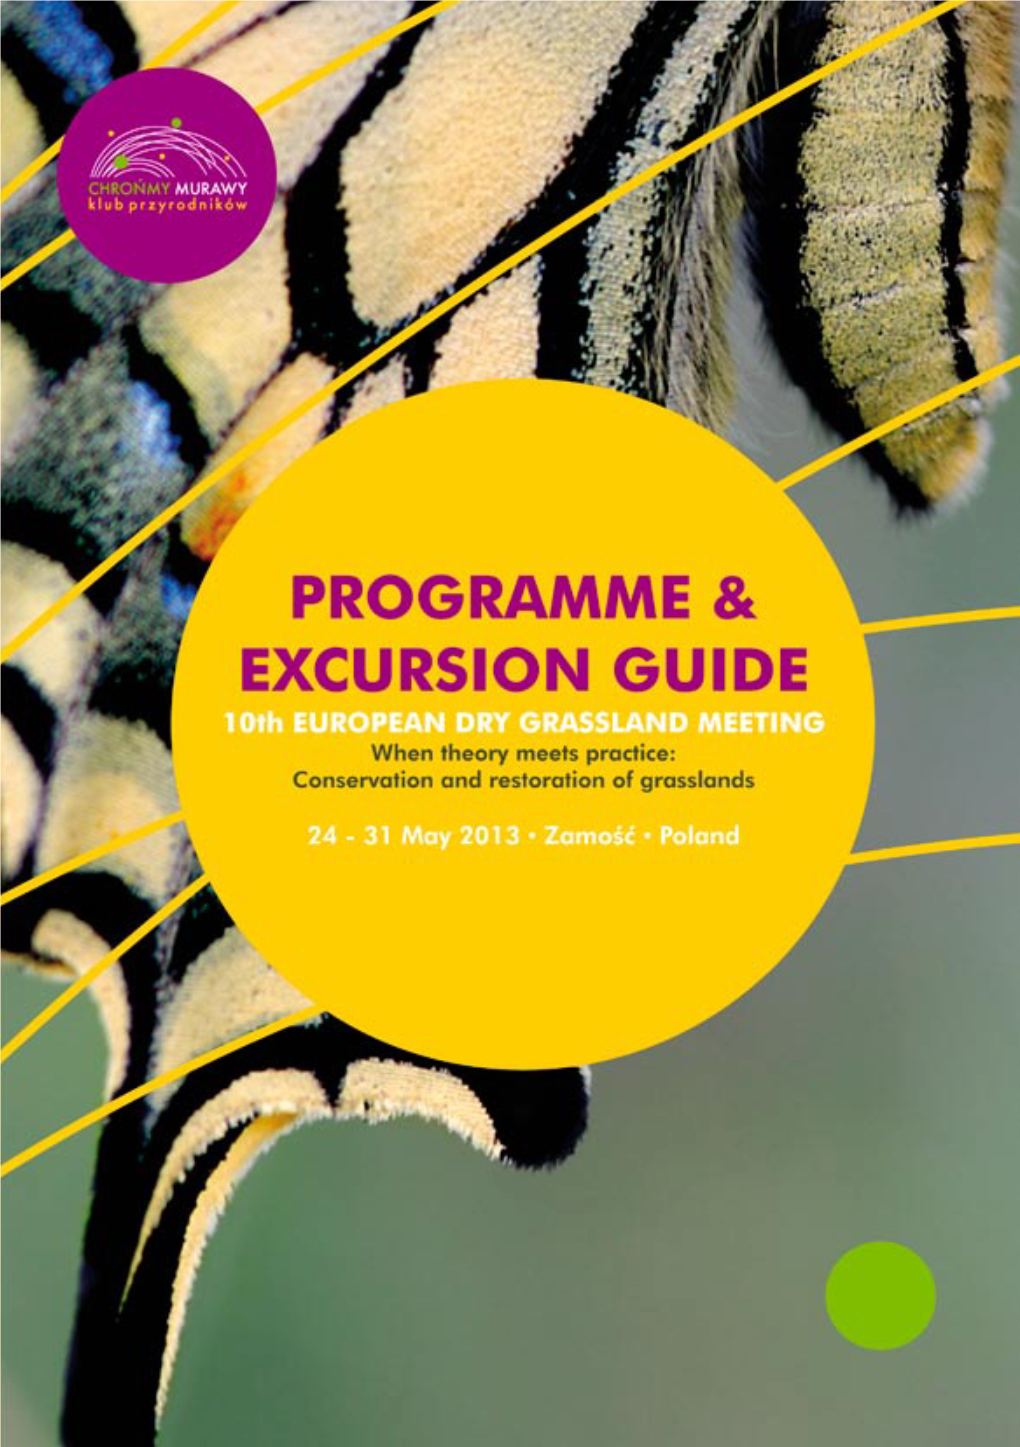 Program and Excursion Guide